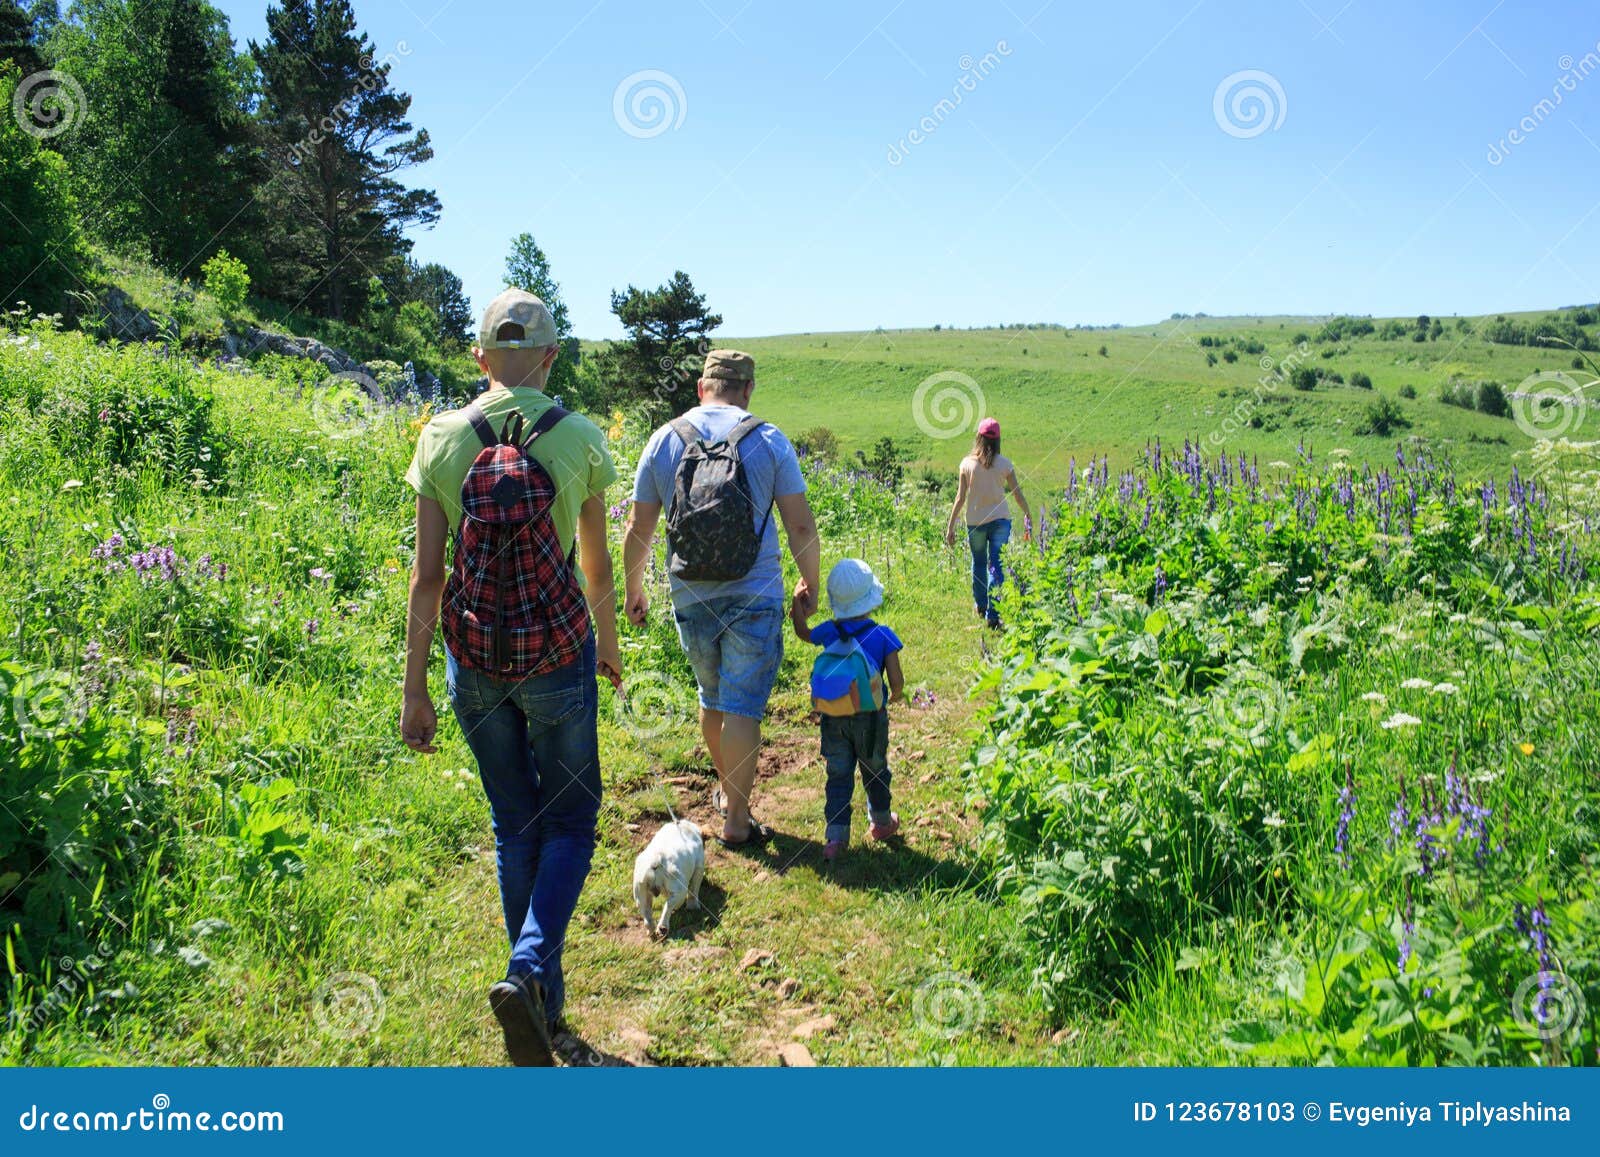 family with children on a hike